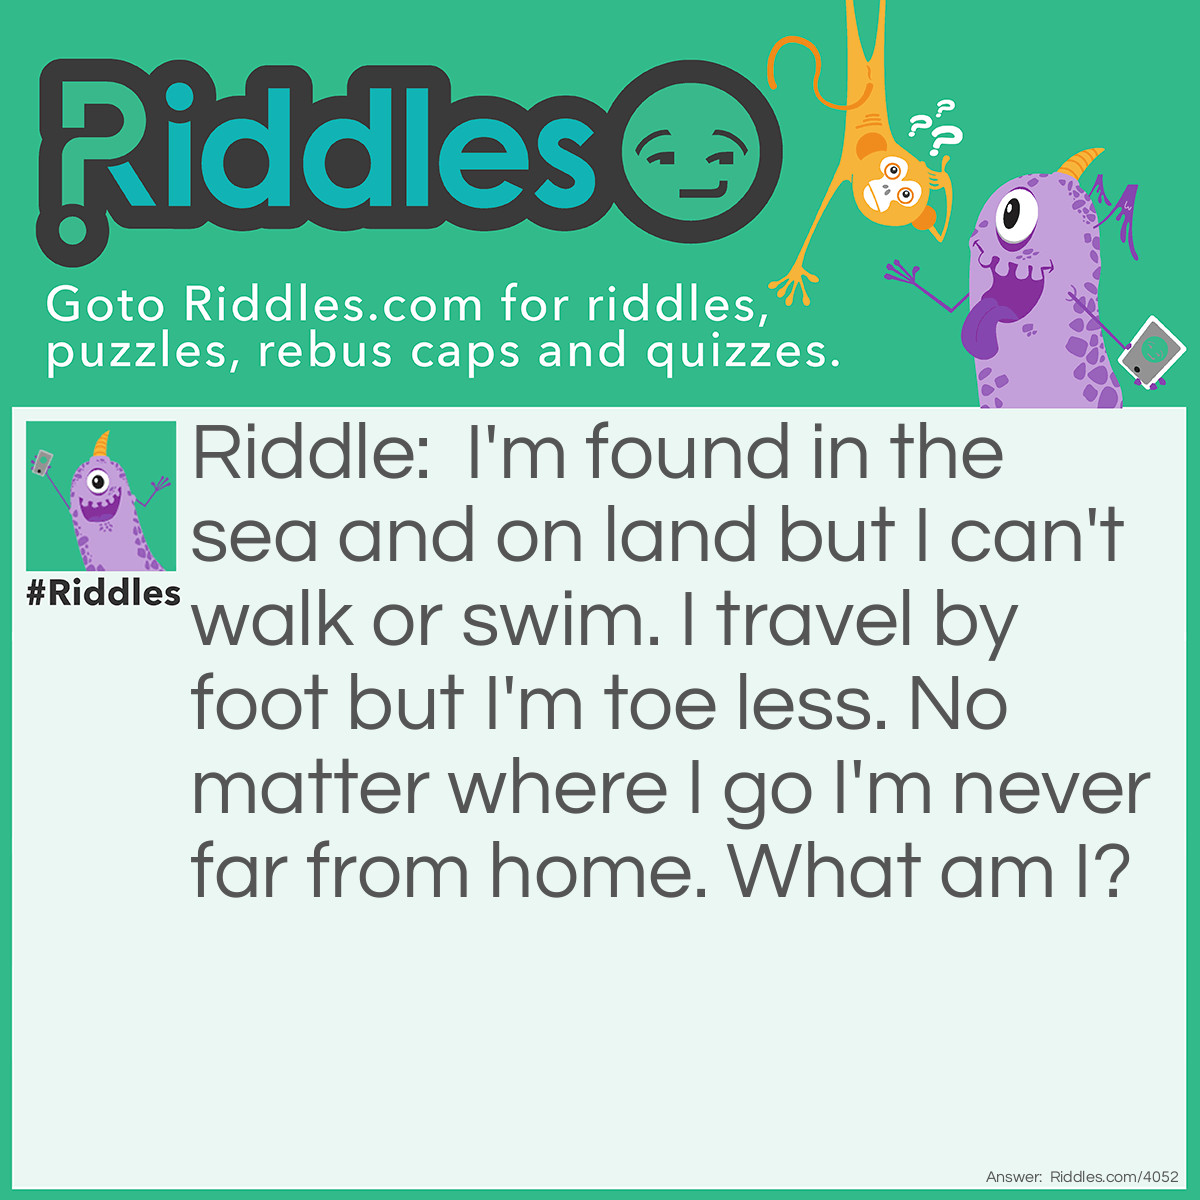 Riddle: I'm found in the sea and on land but I can't walk or swim. I travel by foot but I'm toeless. No matter where I go I'm never far from home. What am I? Answer: A snail.